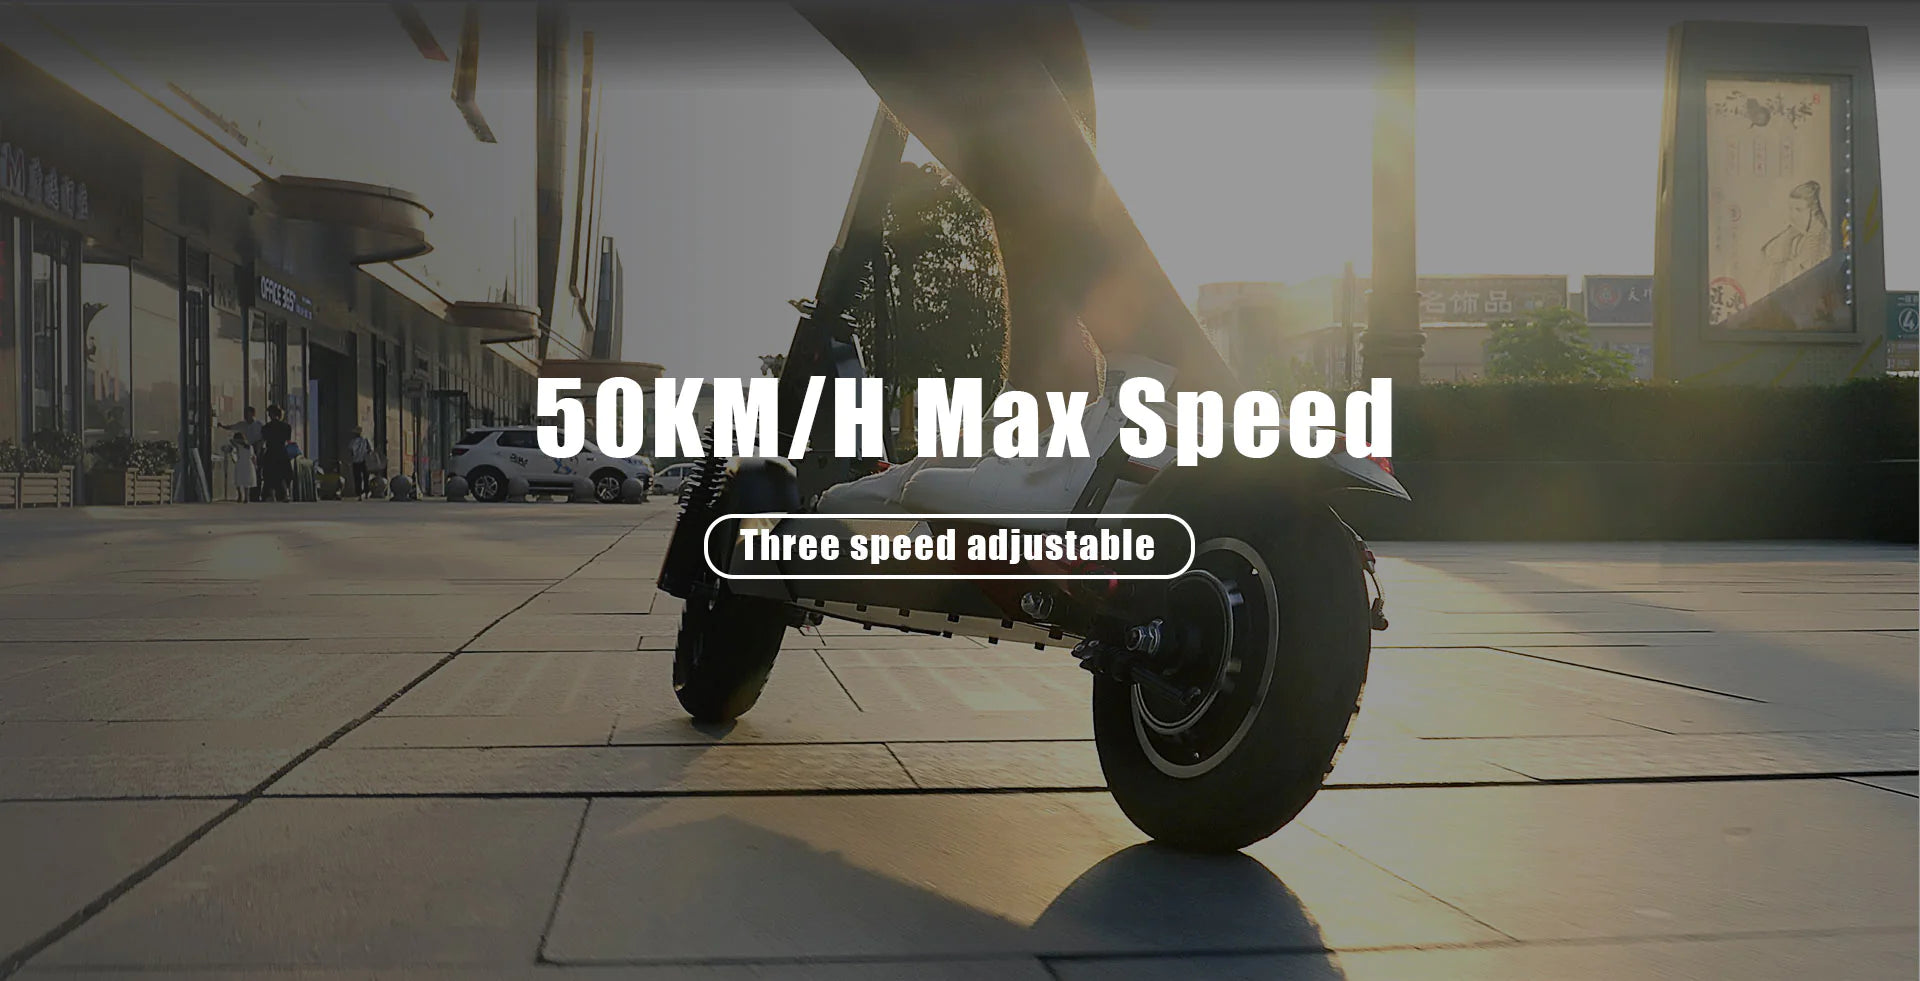 Get Around in Style with KugooKirin M4 Electric Scooter - 500W Motor, 480WH Battery